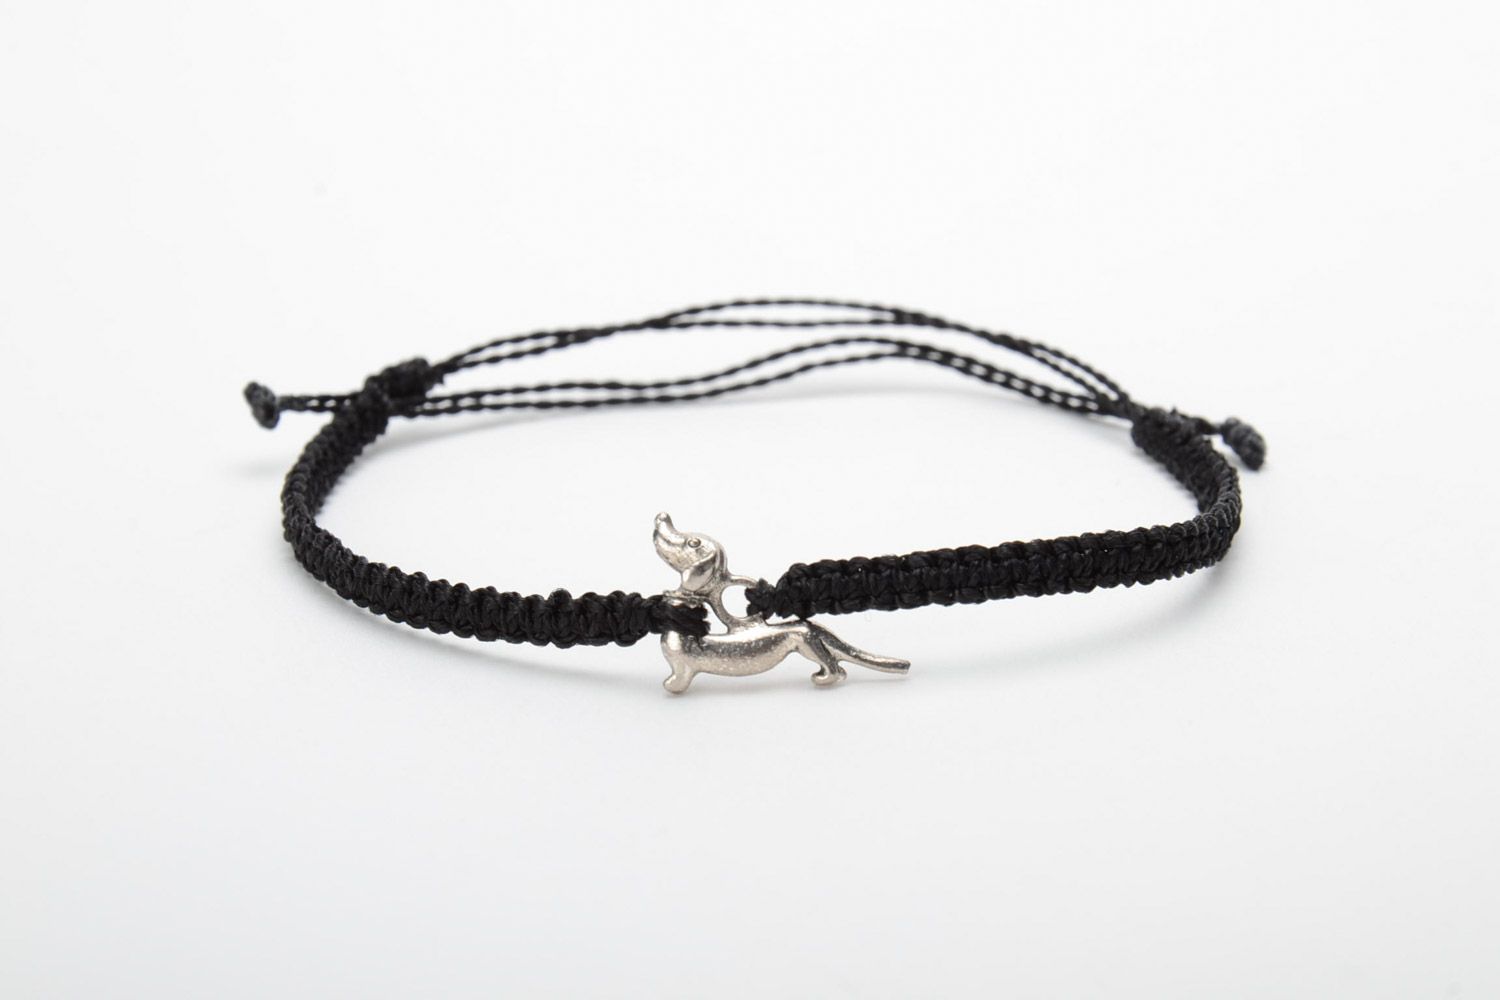 Handmade friendship bracelet woven of gray threads with a badger-dog charm photo 5